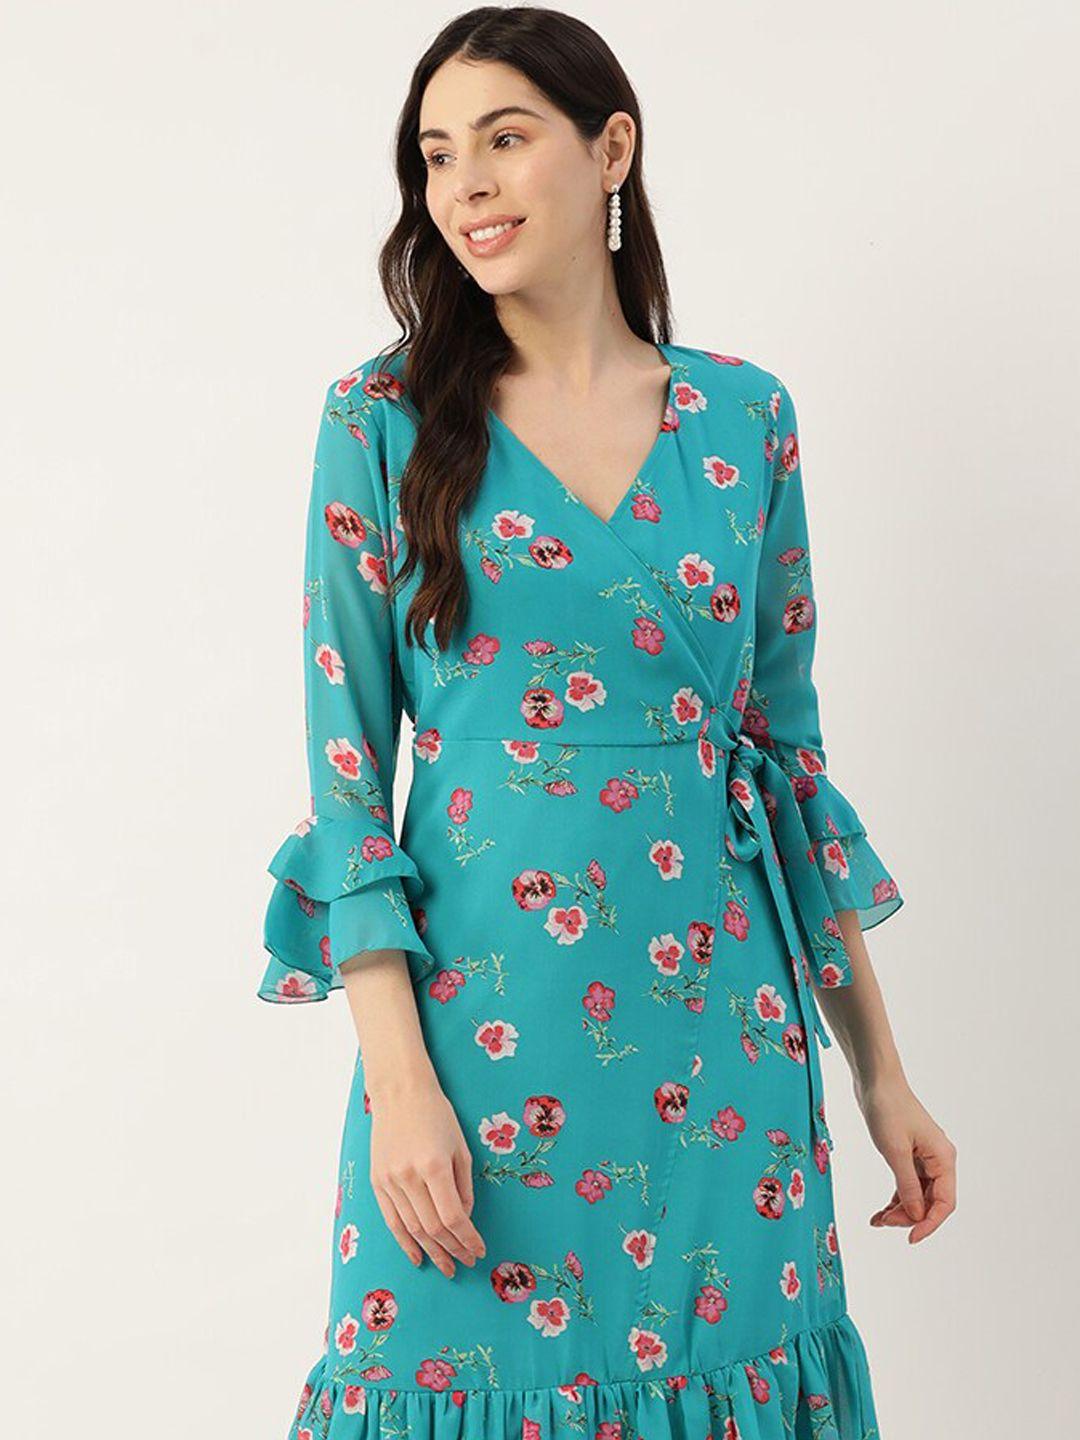 dressberry turquoise blue floral printed v-neck bell sleeves georgette wrap dress